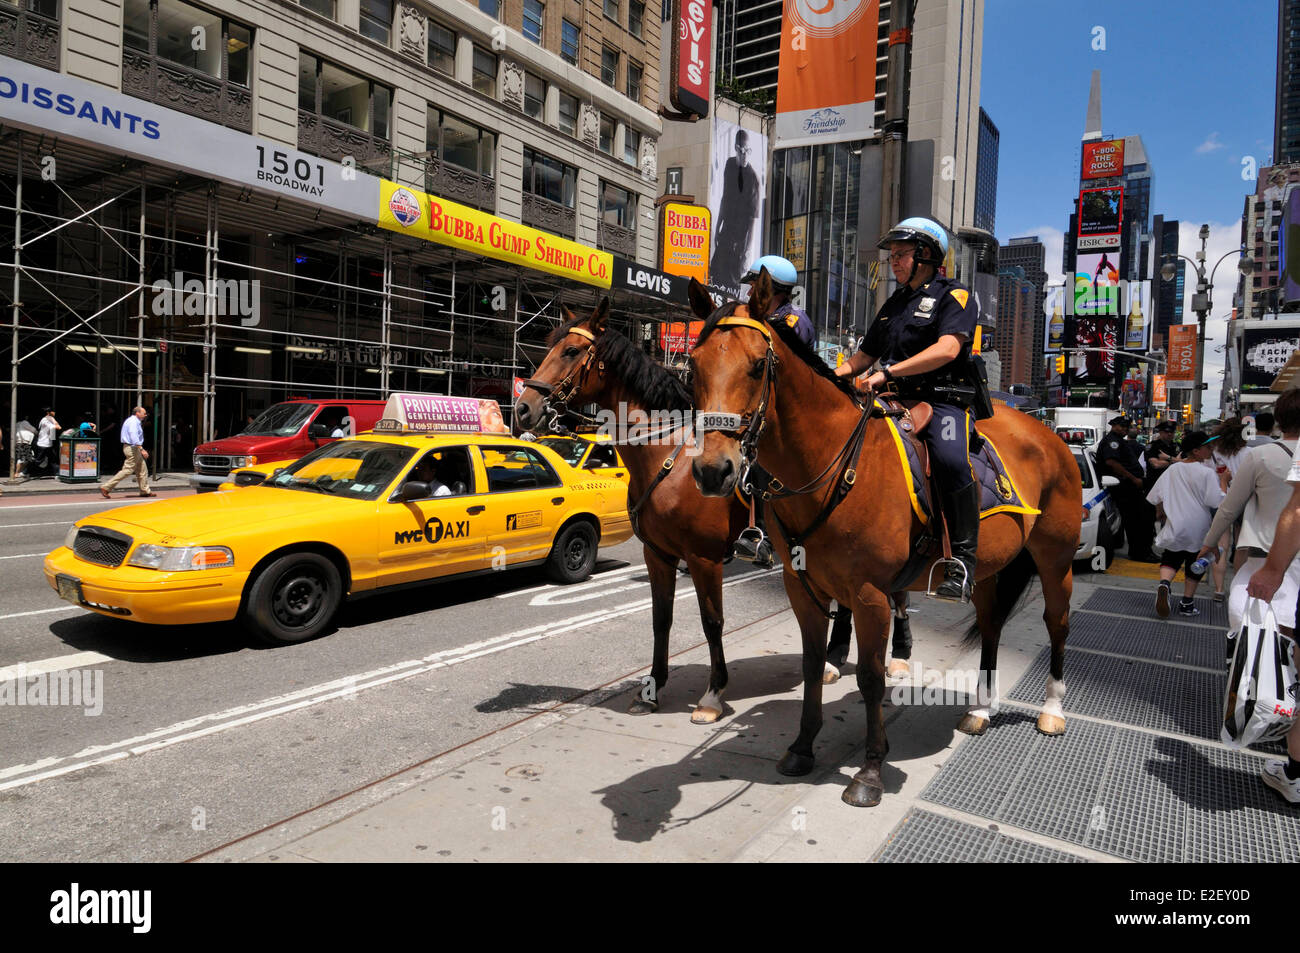 United States, New York, Times Square, yellow cab and mounted policemen Stock Photo